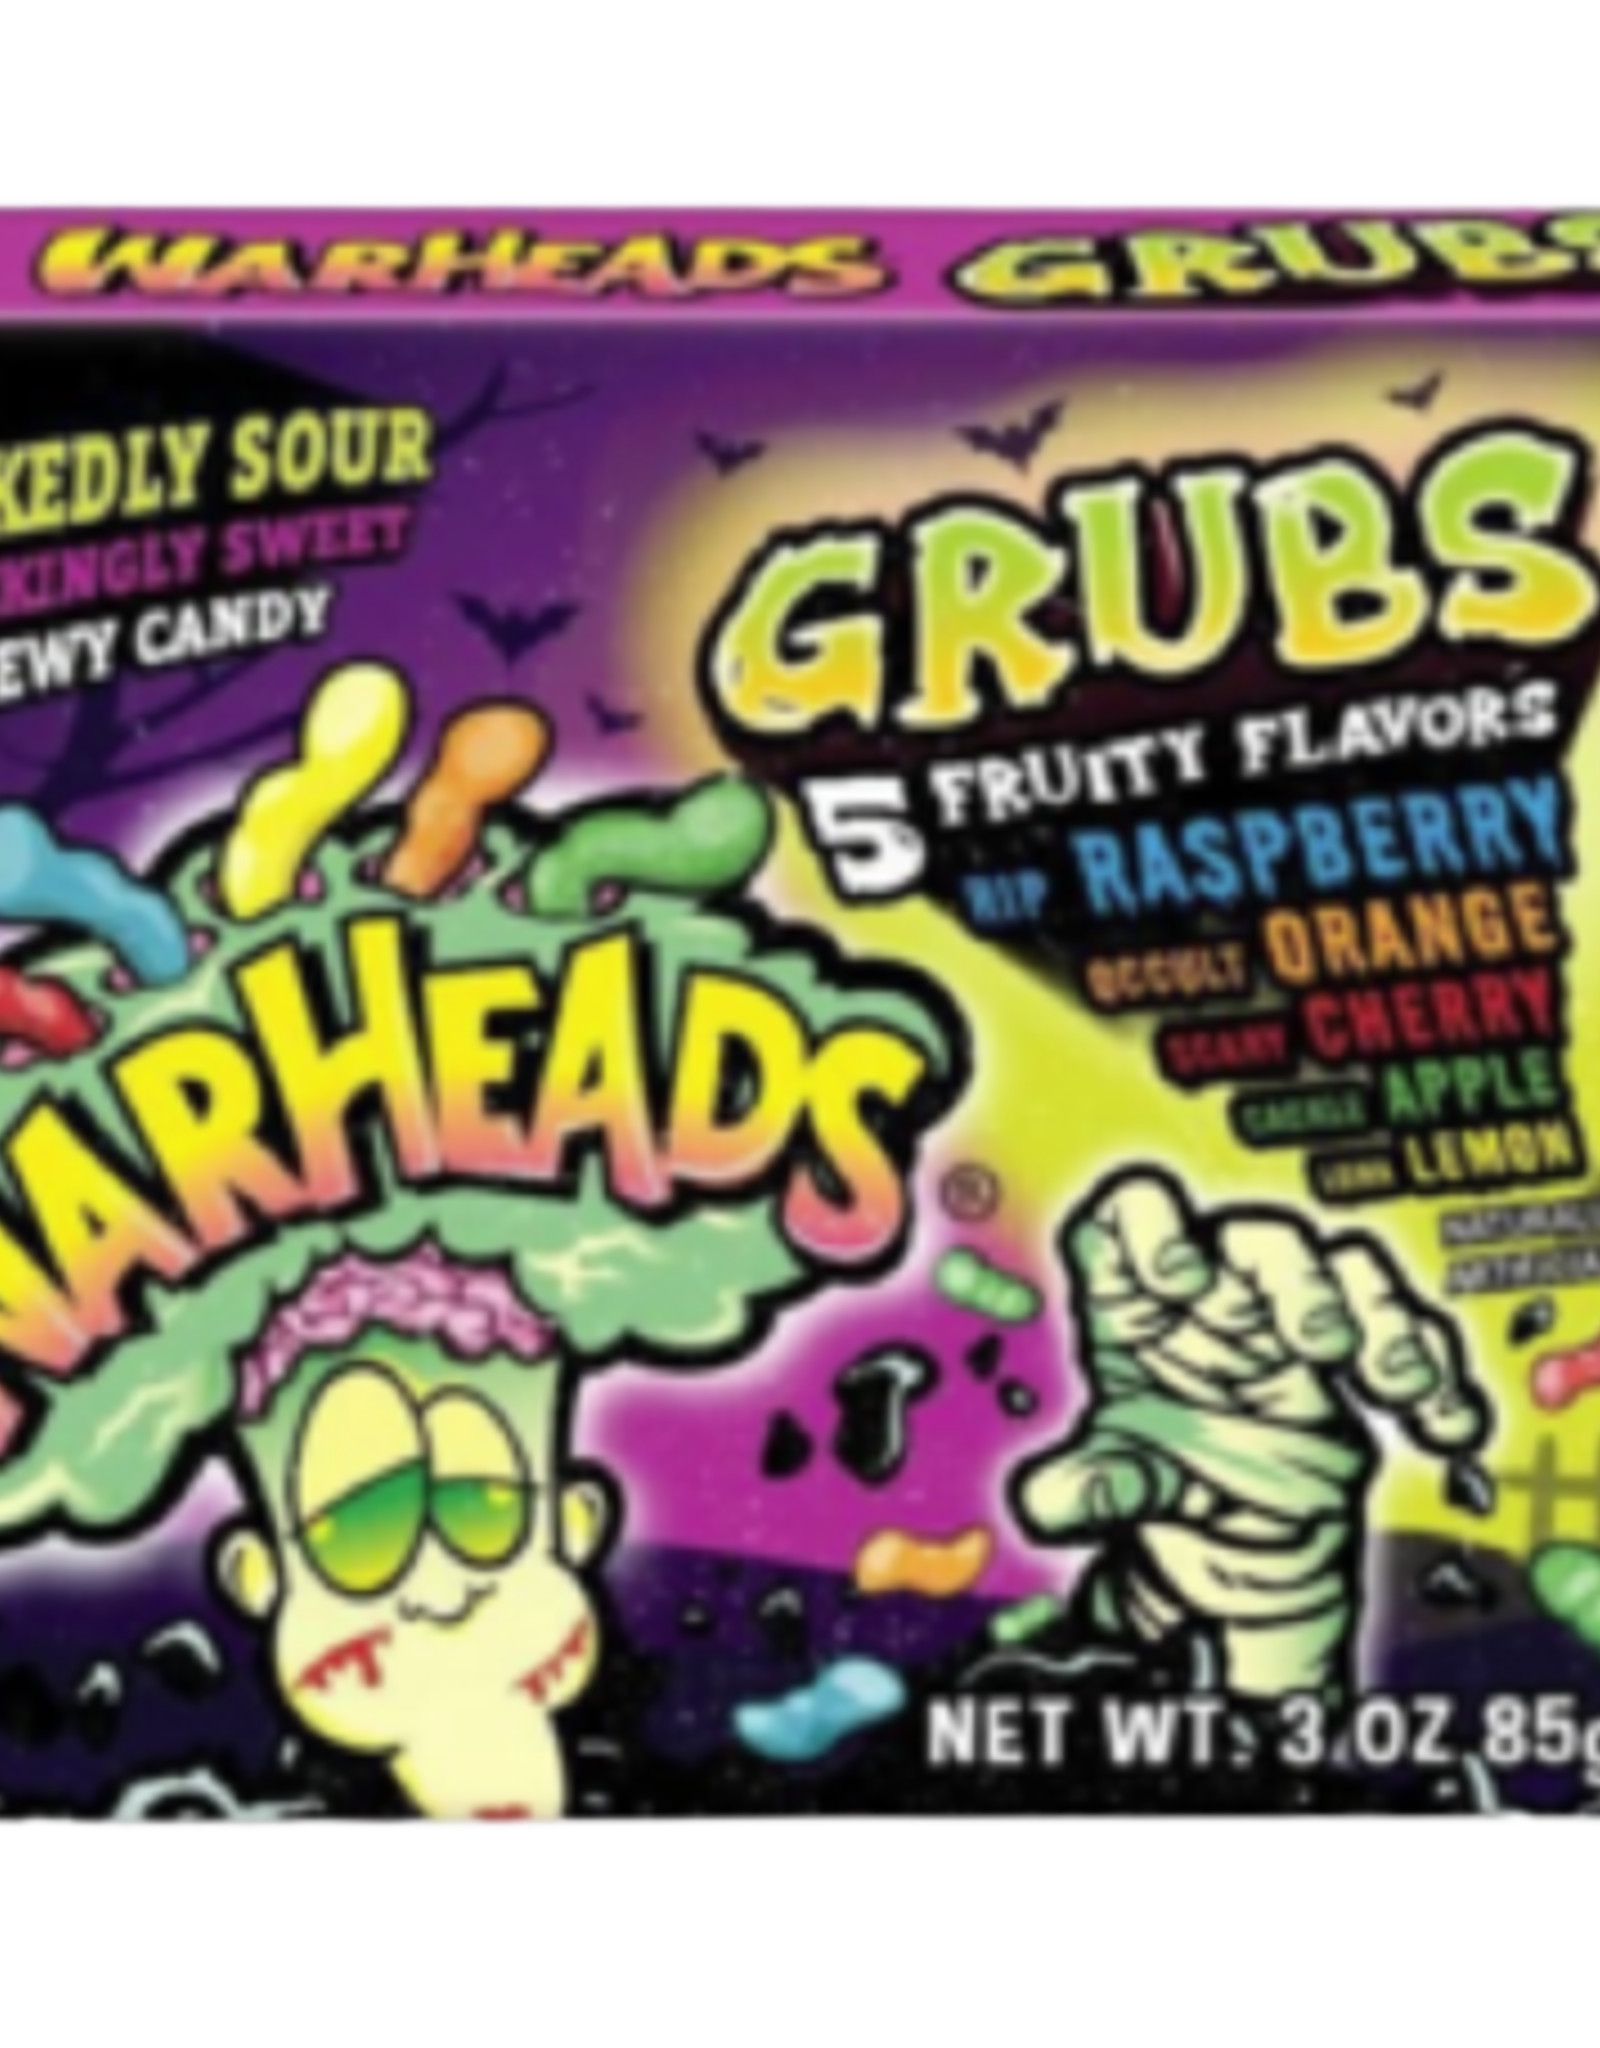 Warheads Grubs Wickedly Sour